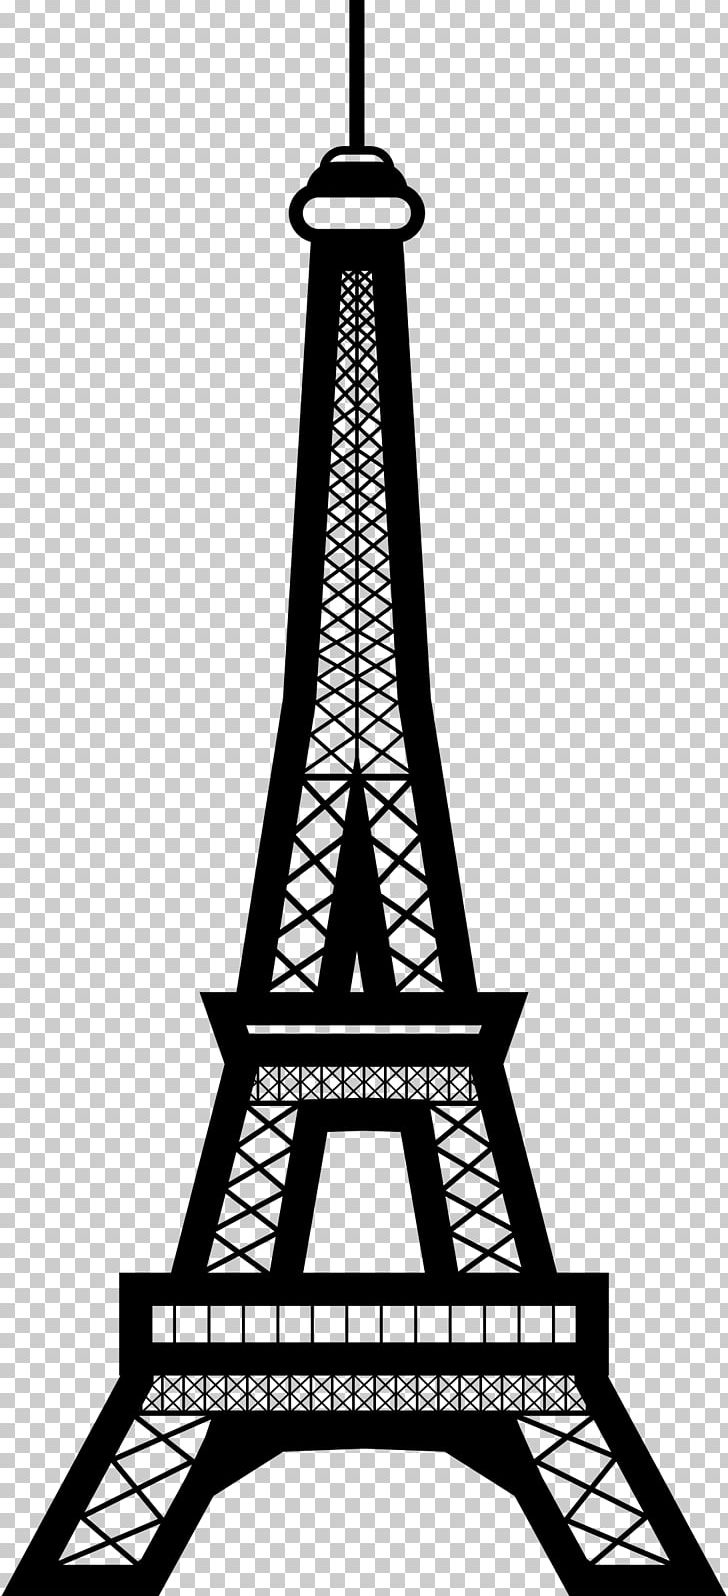 Eiffel Tower PNG, Clipart, Eiffel Tower Free PNG Download.